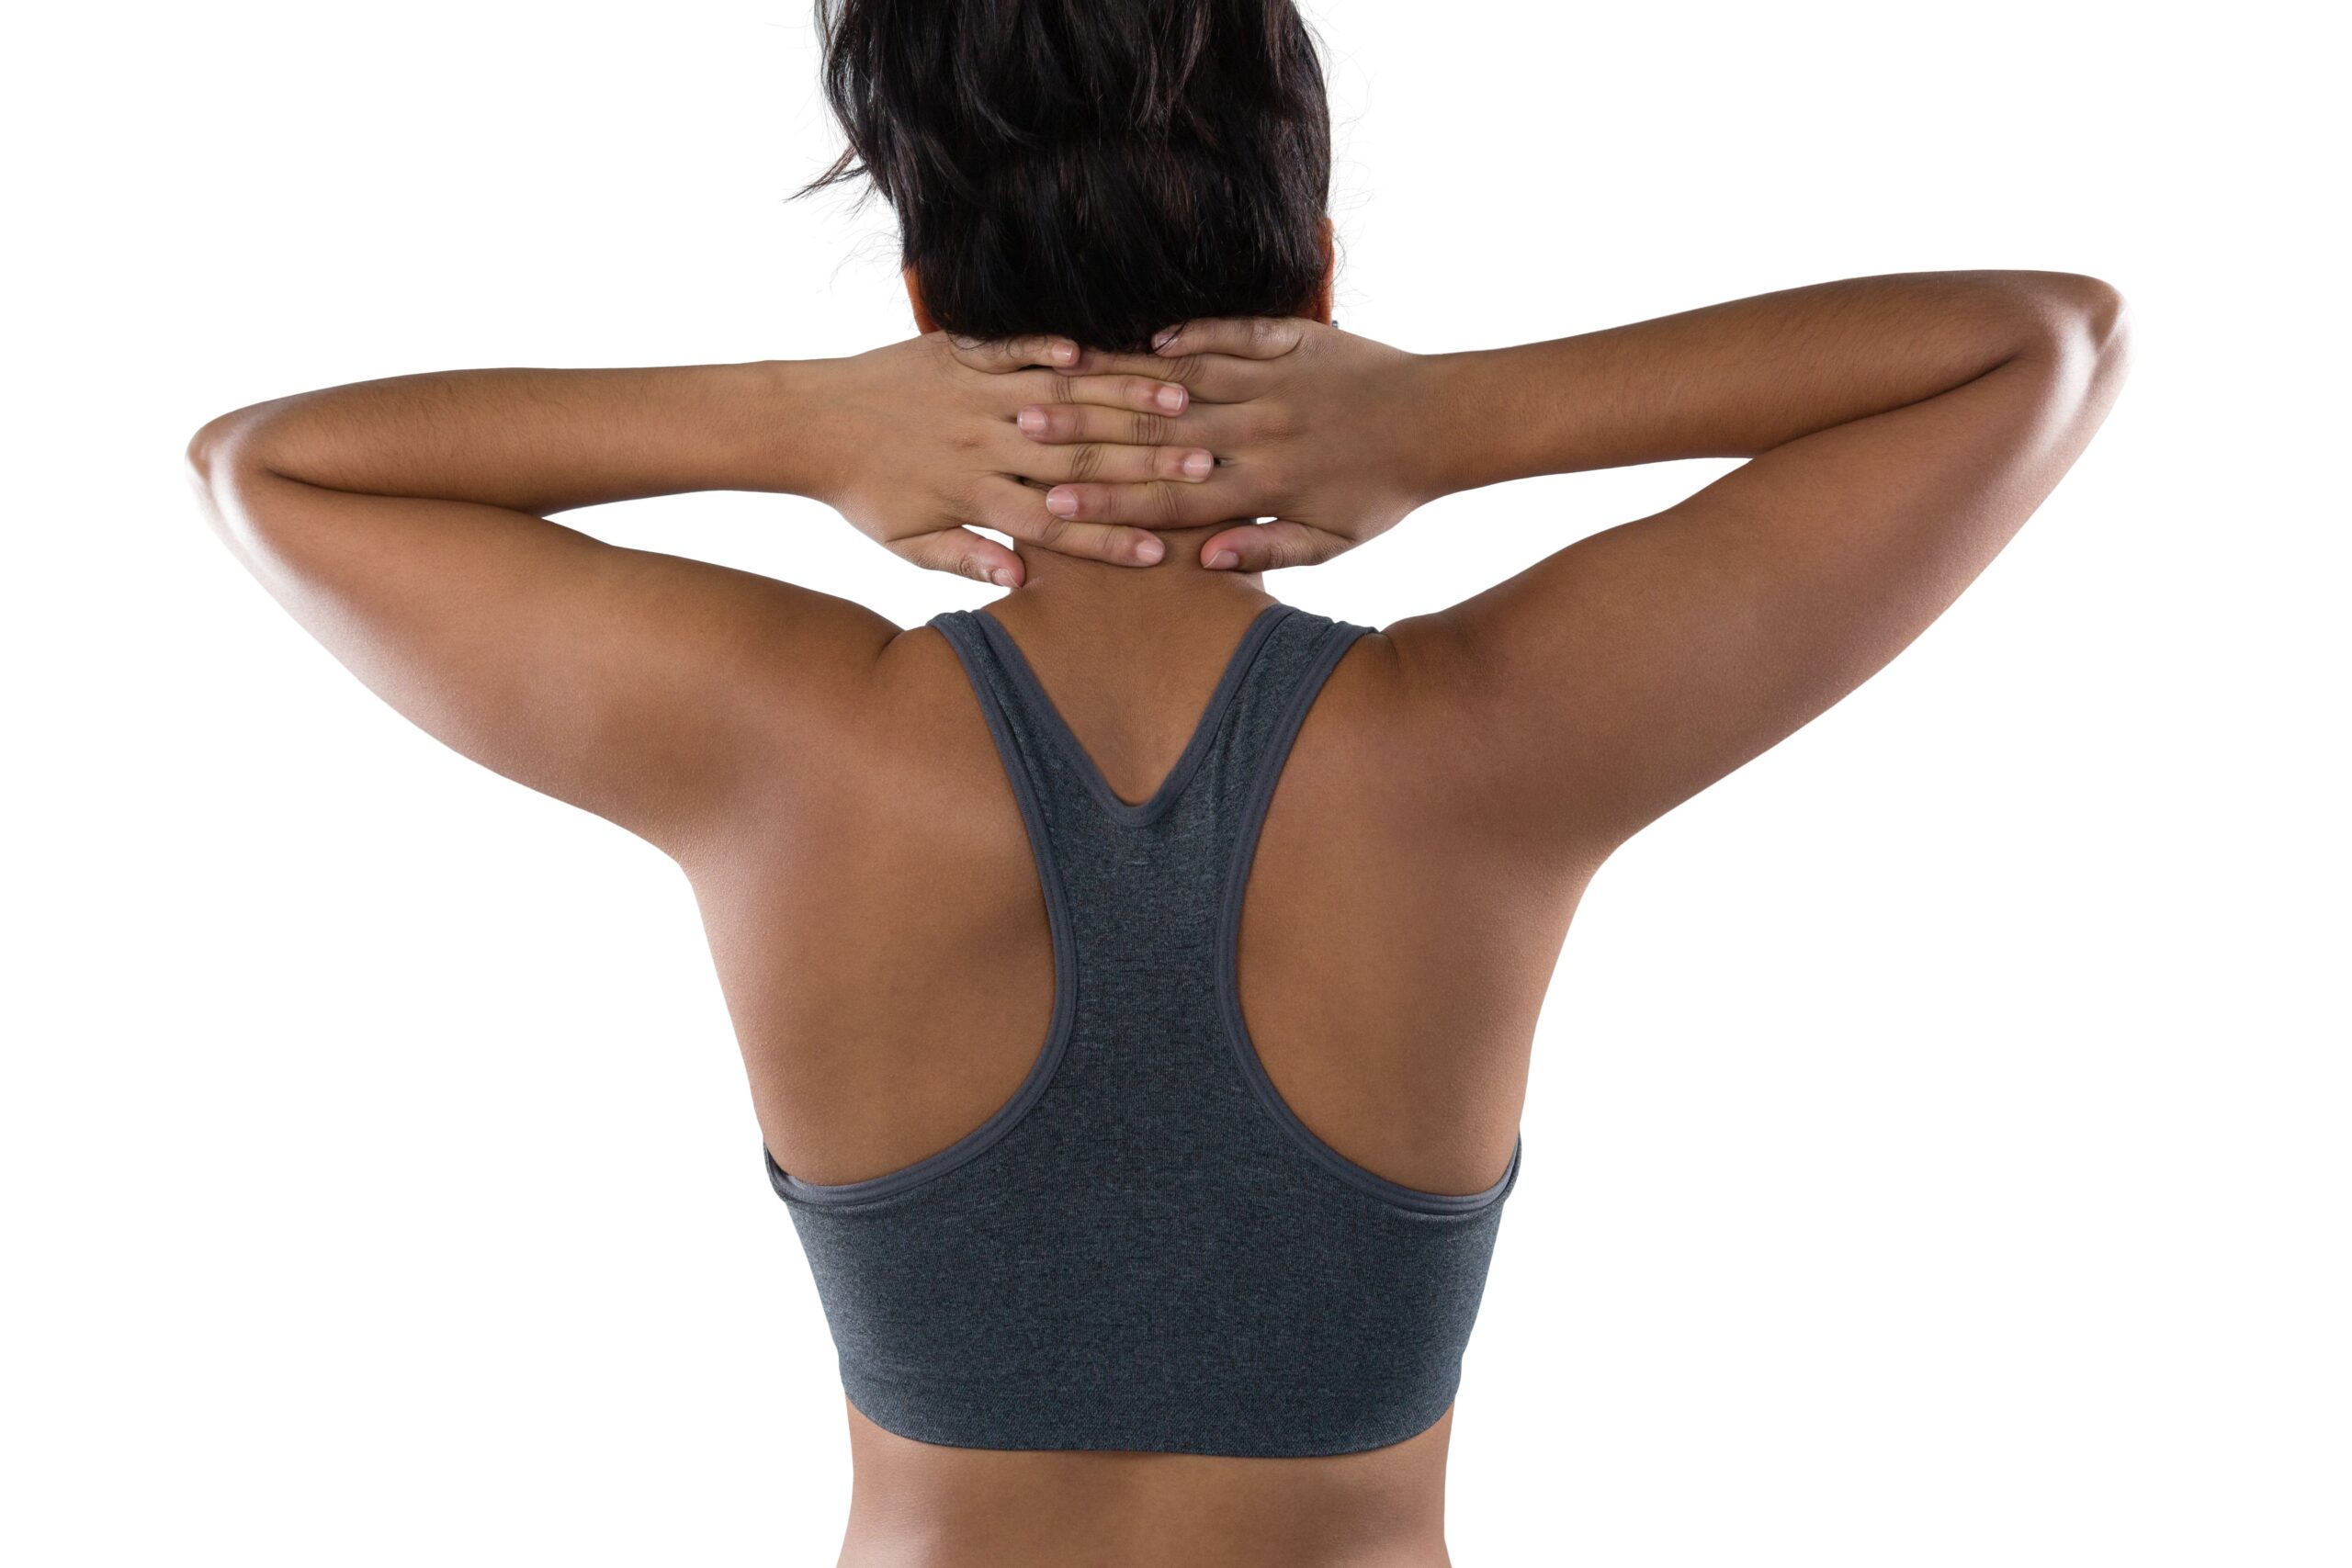 My sports bra: Causing my neck tightness and pain? – Get Well